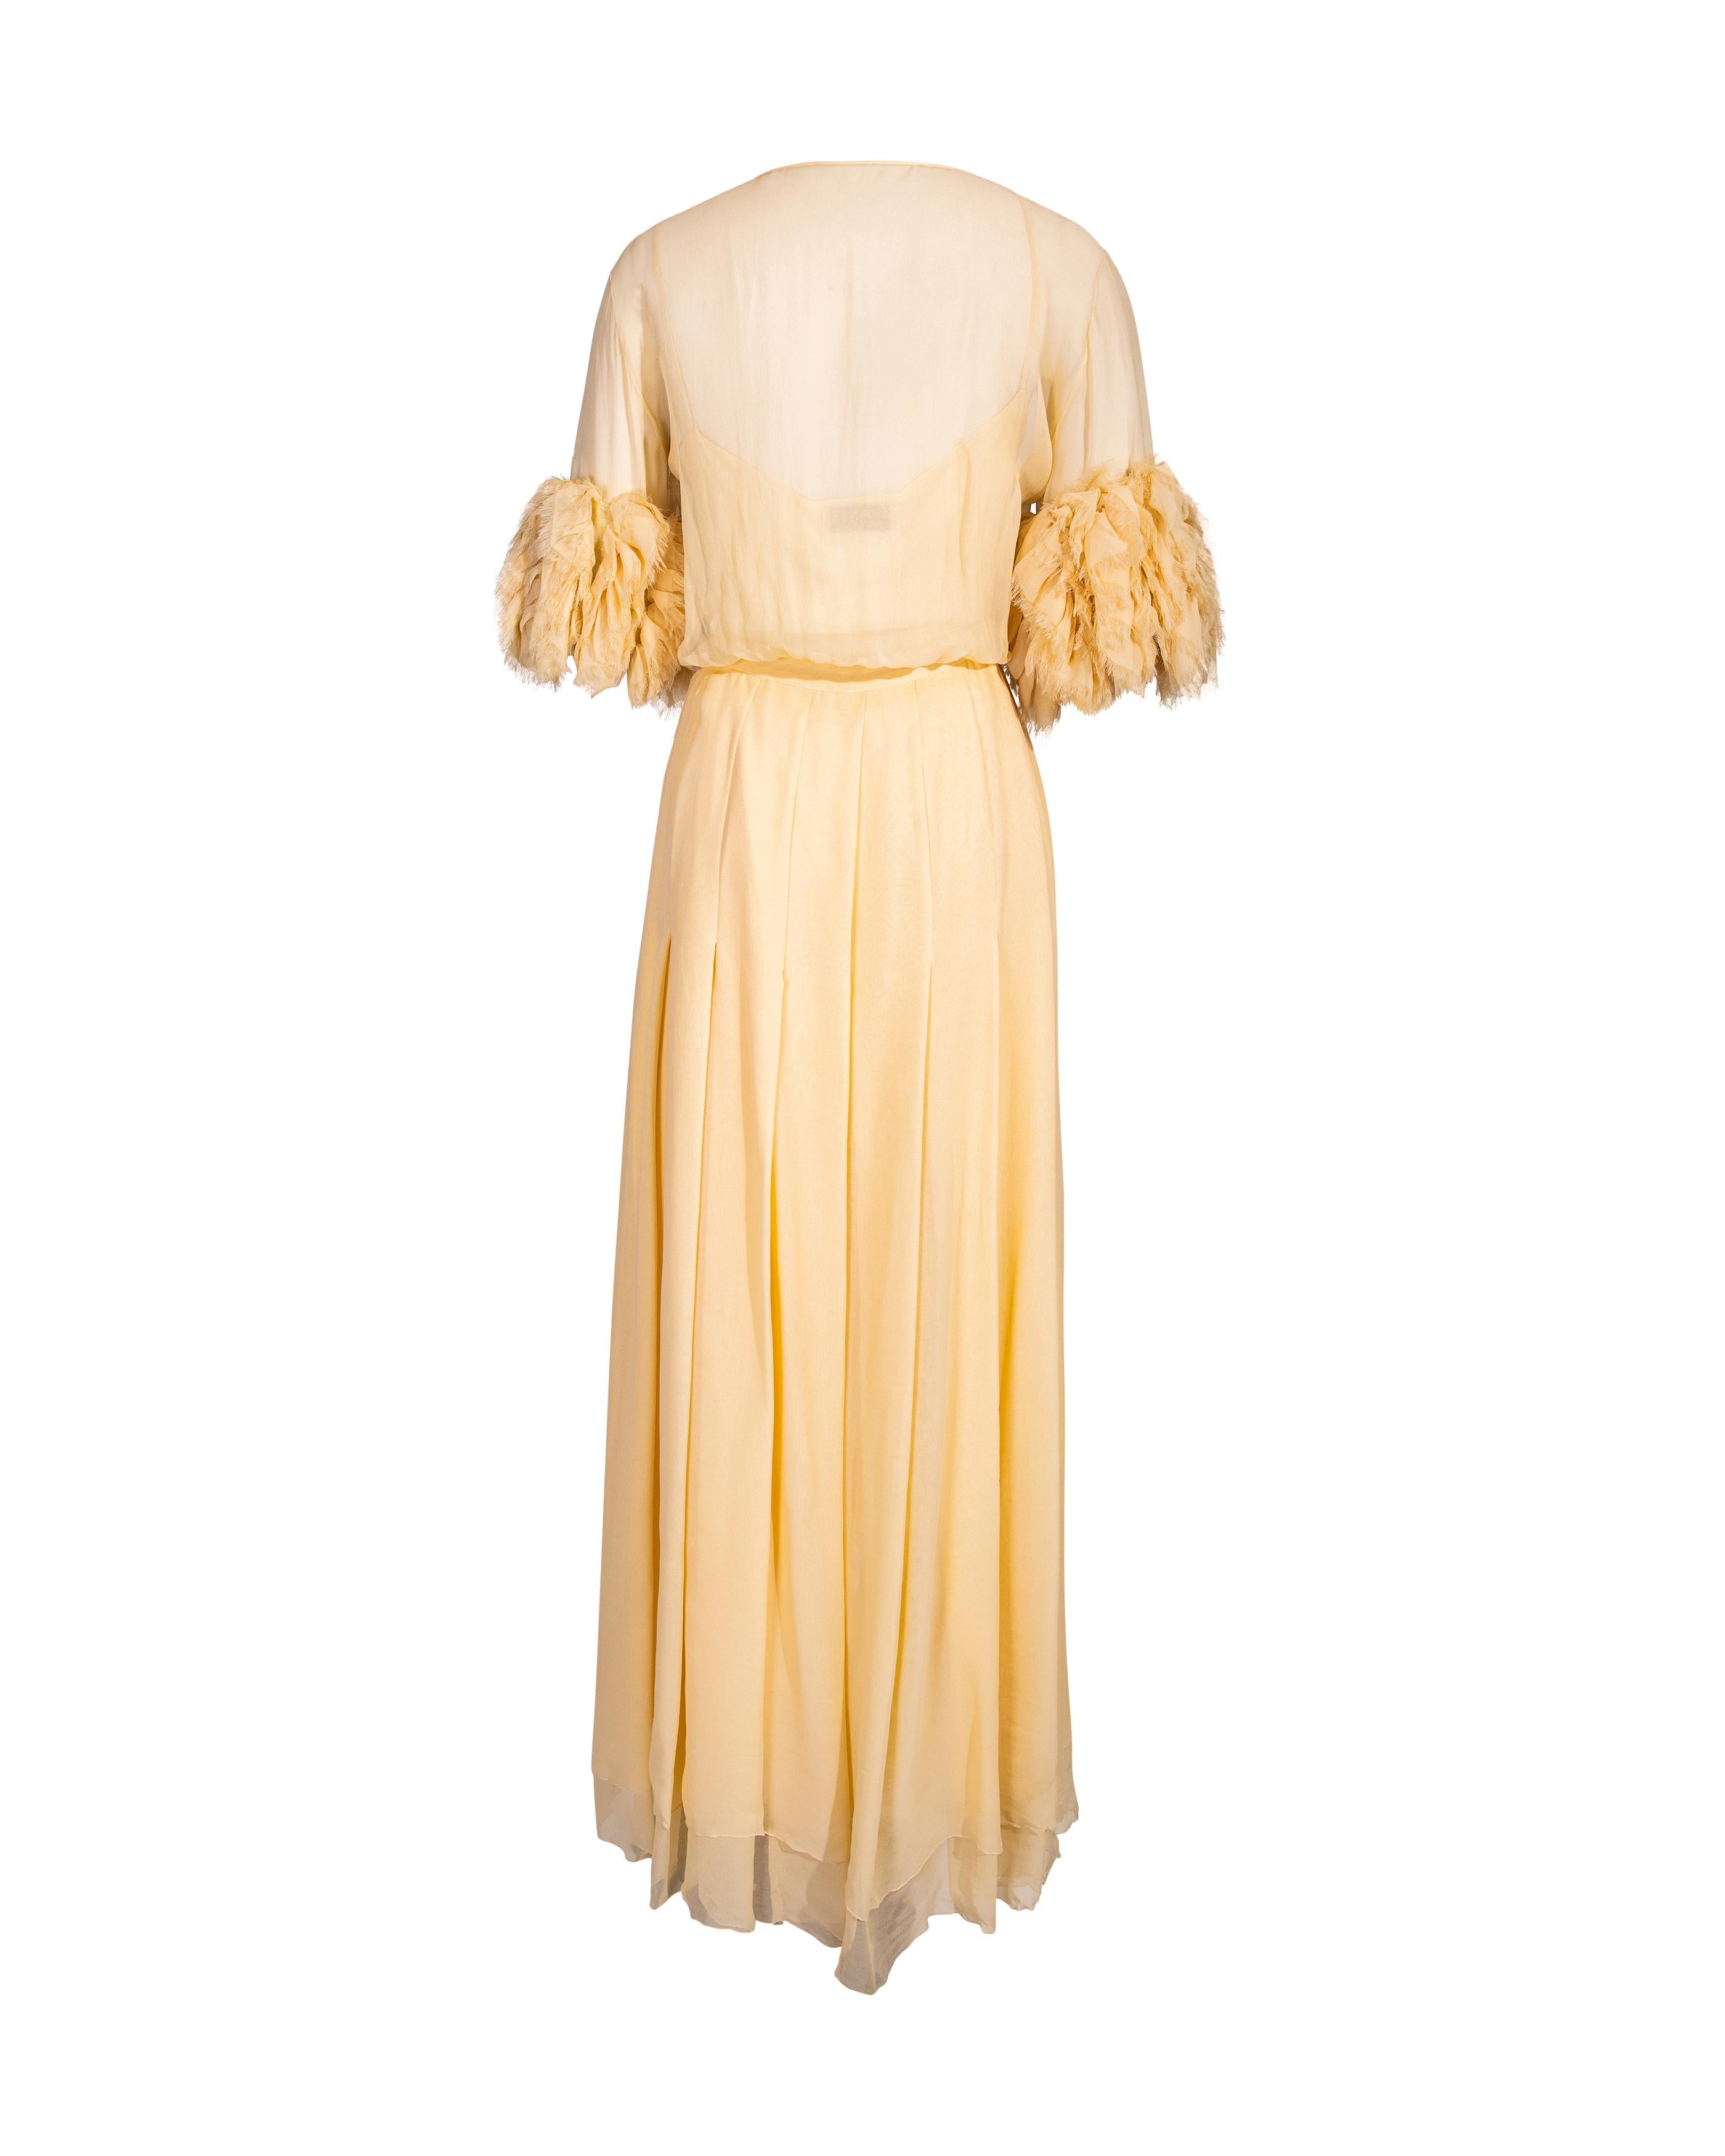 S/S 1984 Chanel by Karl Lagerfeld Butter Yellow Silk Chiffon Gown 1